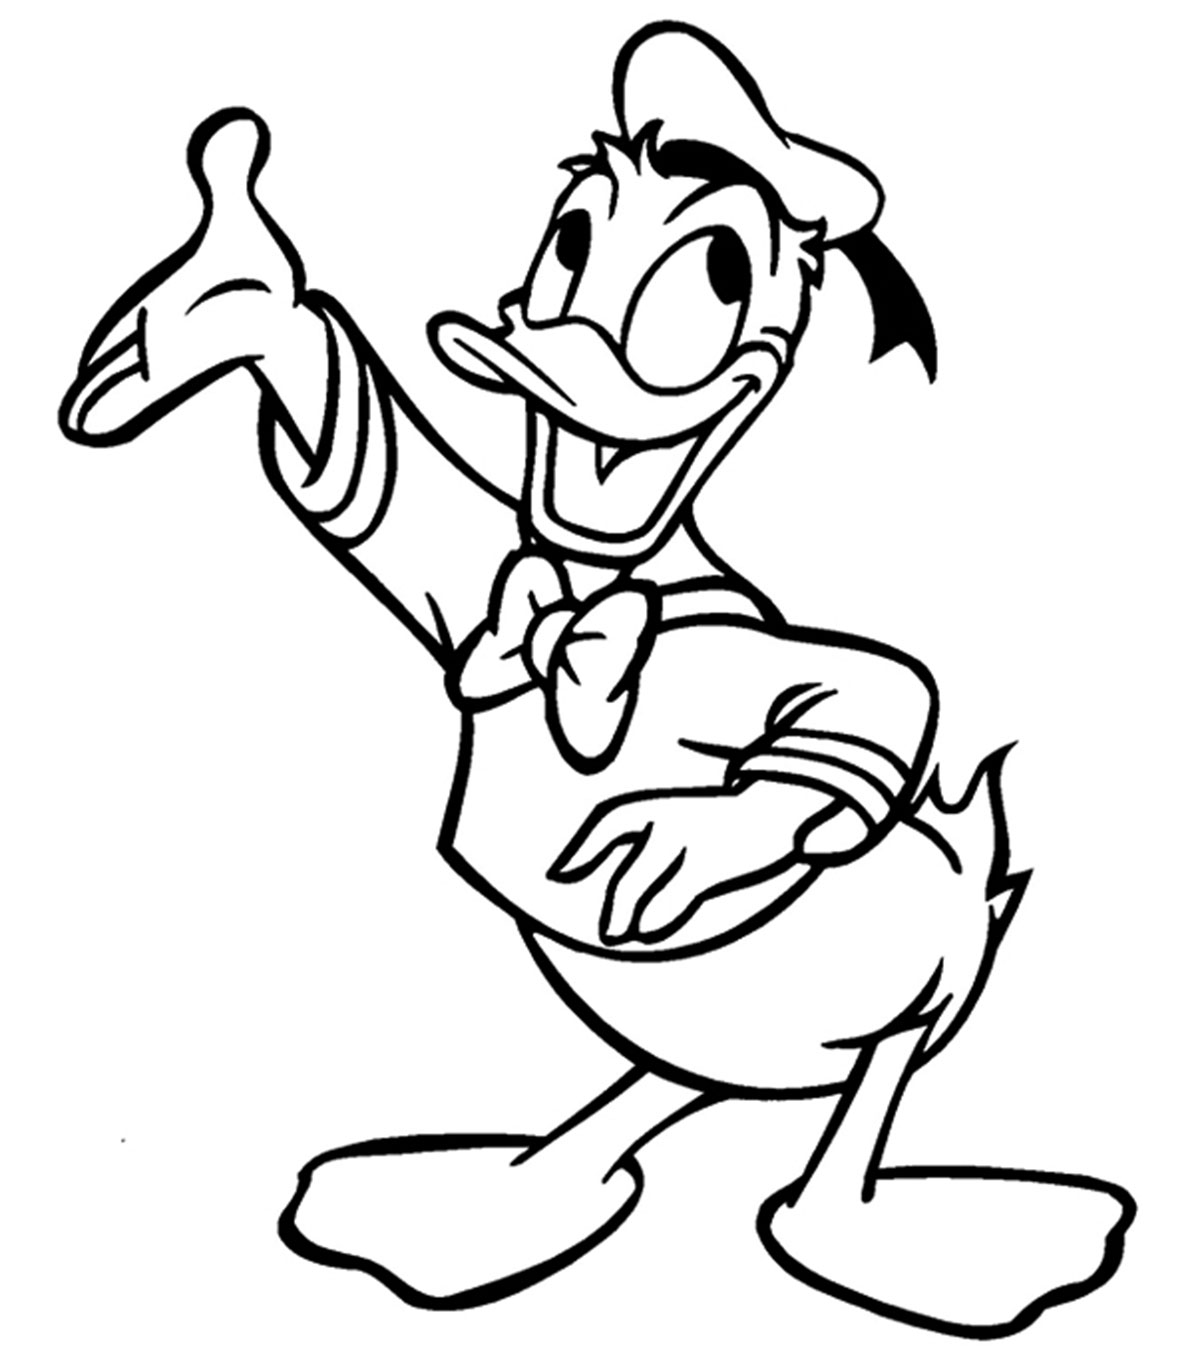 Coloring pages cute donald duck coloring pages your toddler will love